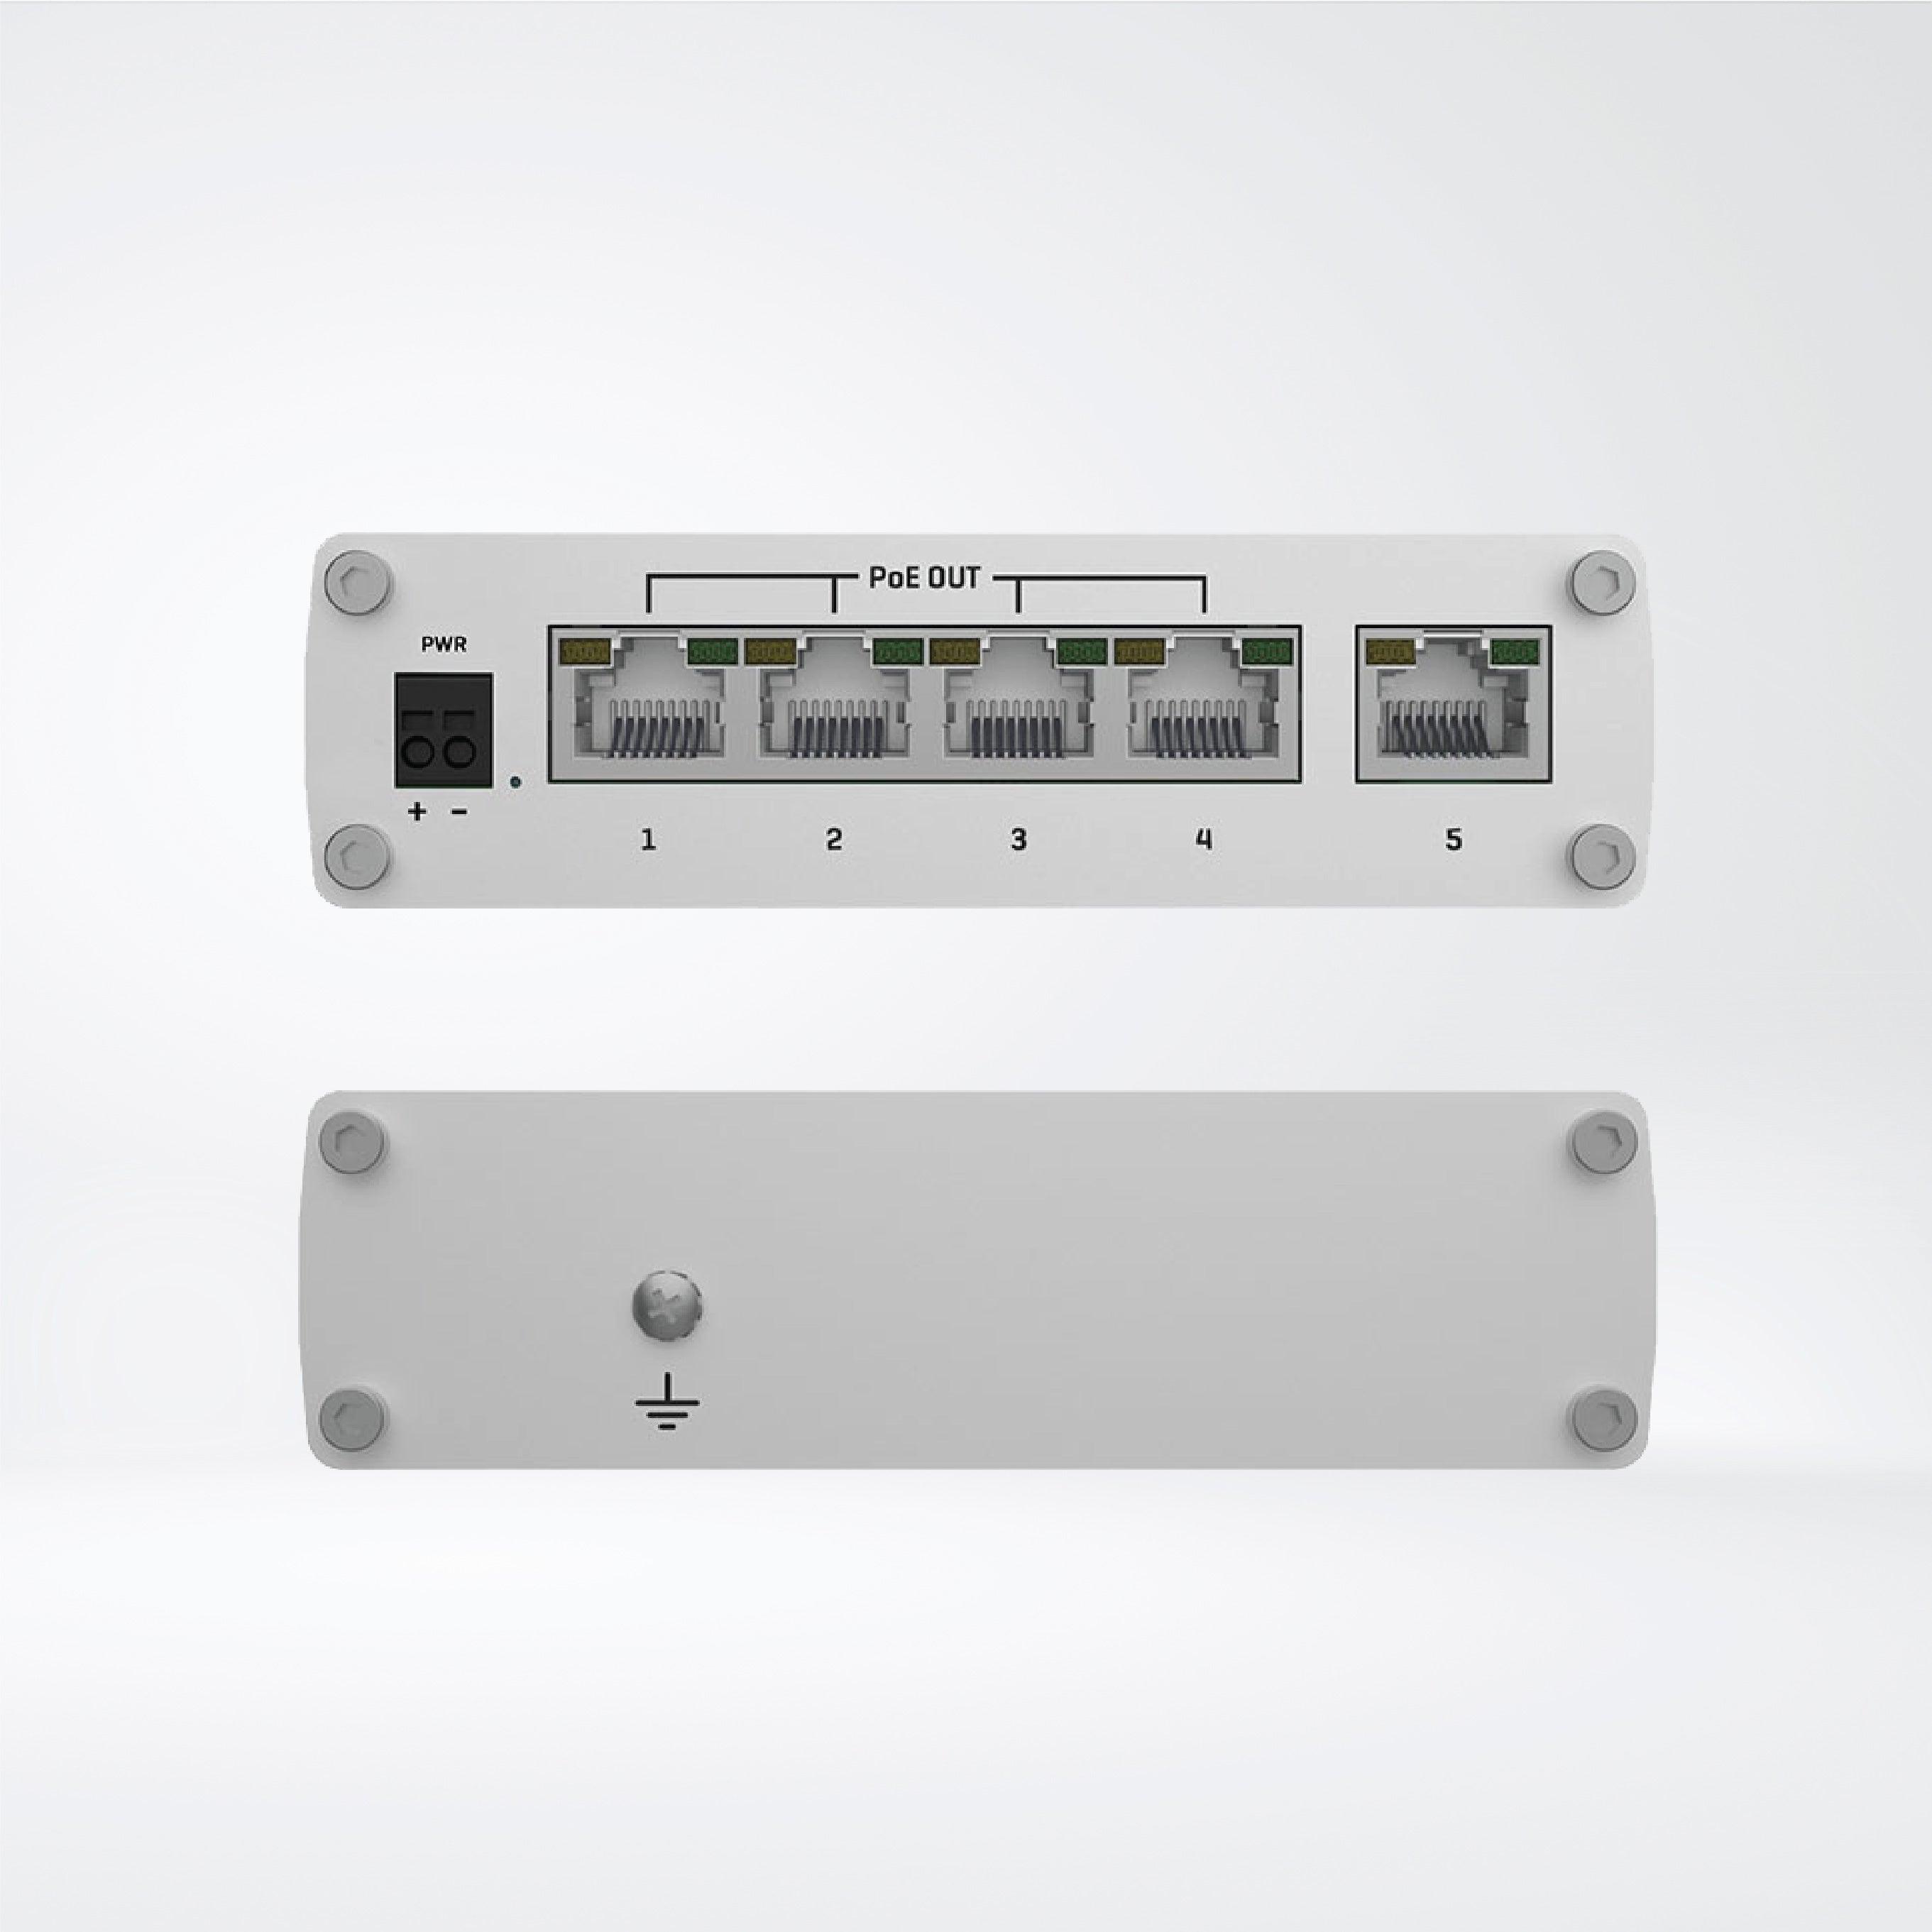 TSW101 5 x Gigabit Ethernet ports , 4 x PoE+ ports Ideal for in-vehicle solutions - Riverplus